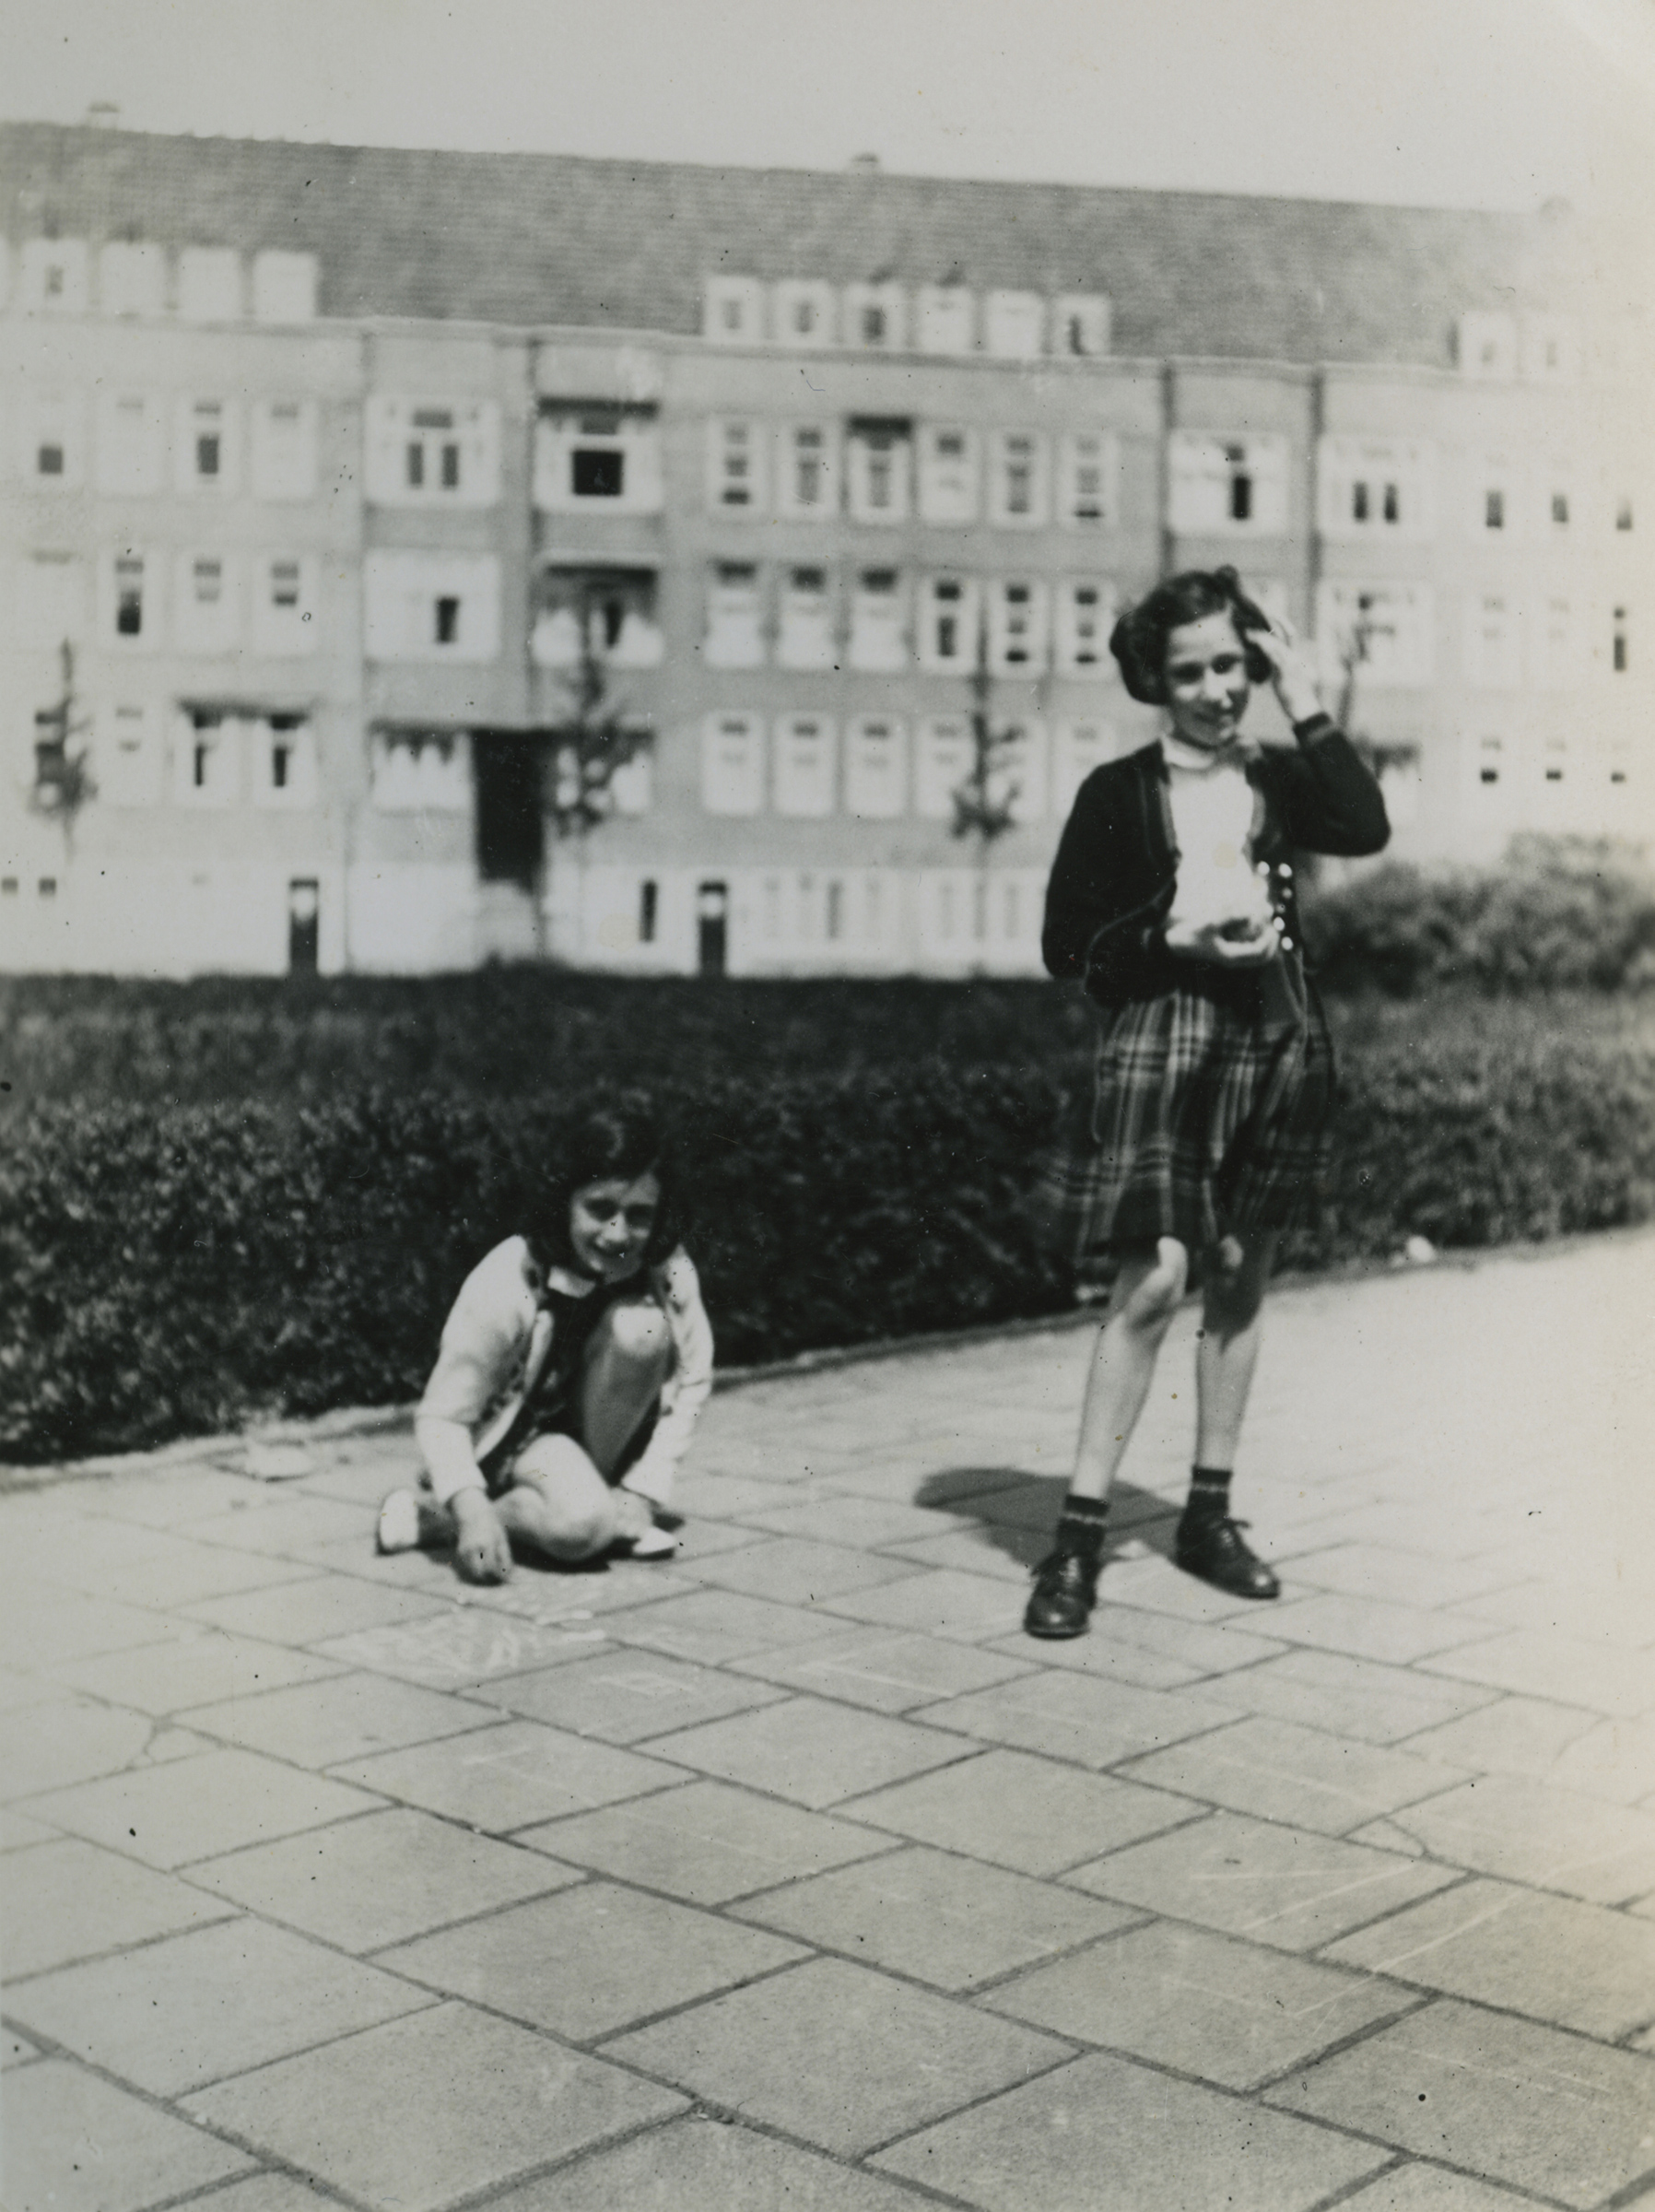 Frank and Pick-Goslar playing at the Merwedeplein in Amsterdam, May 1940. (Anne Frank Fonds Basel/Getty Images)